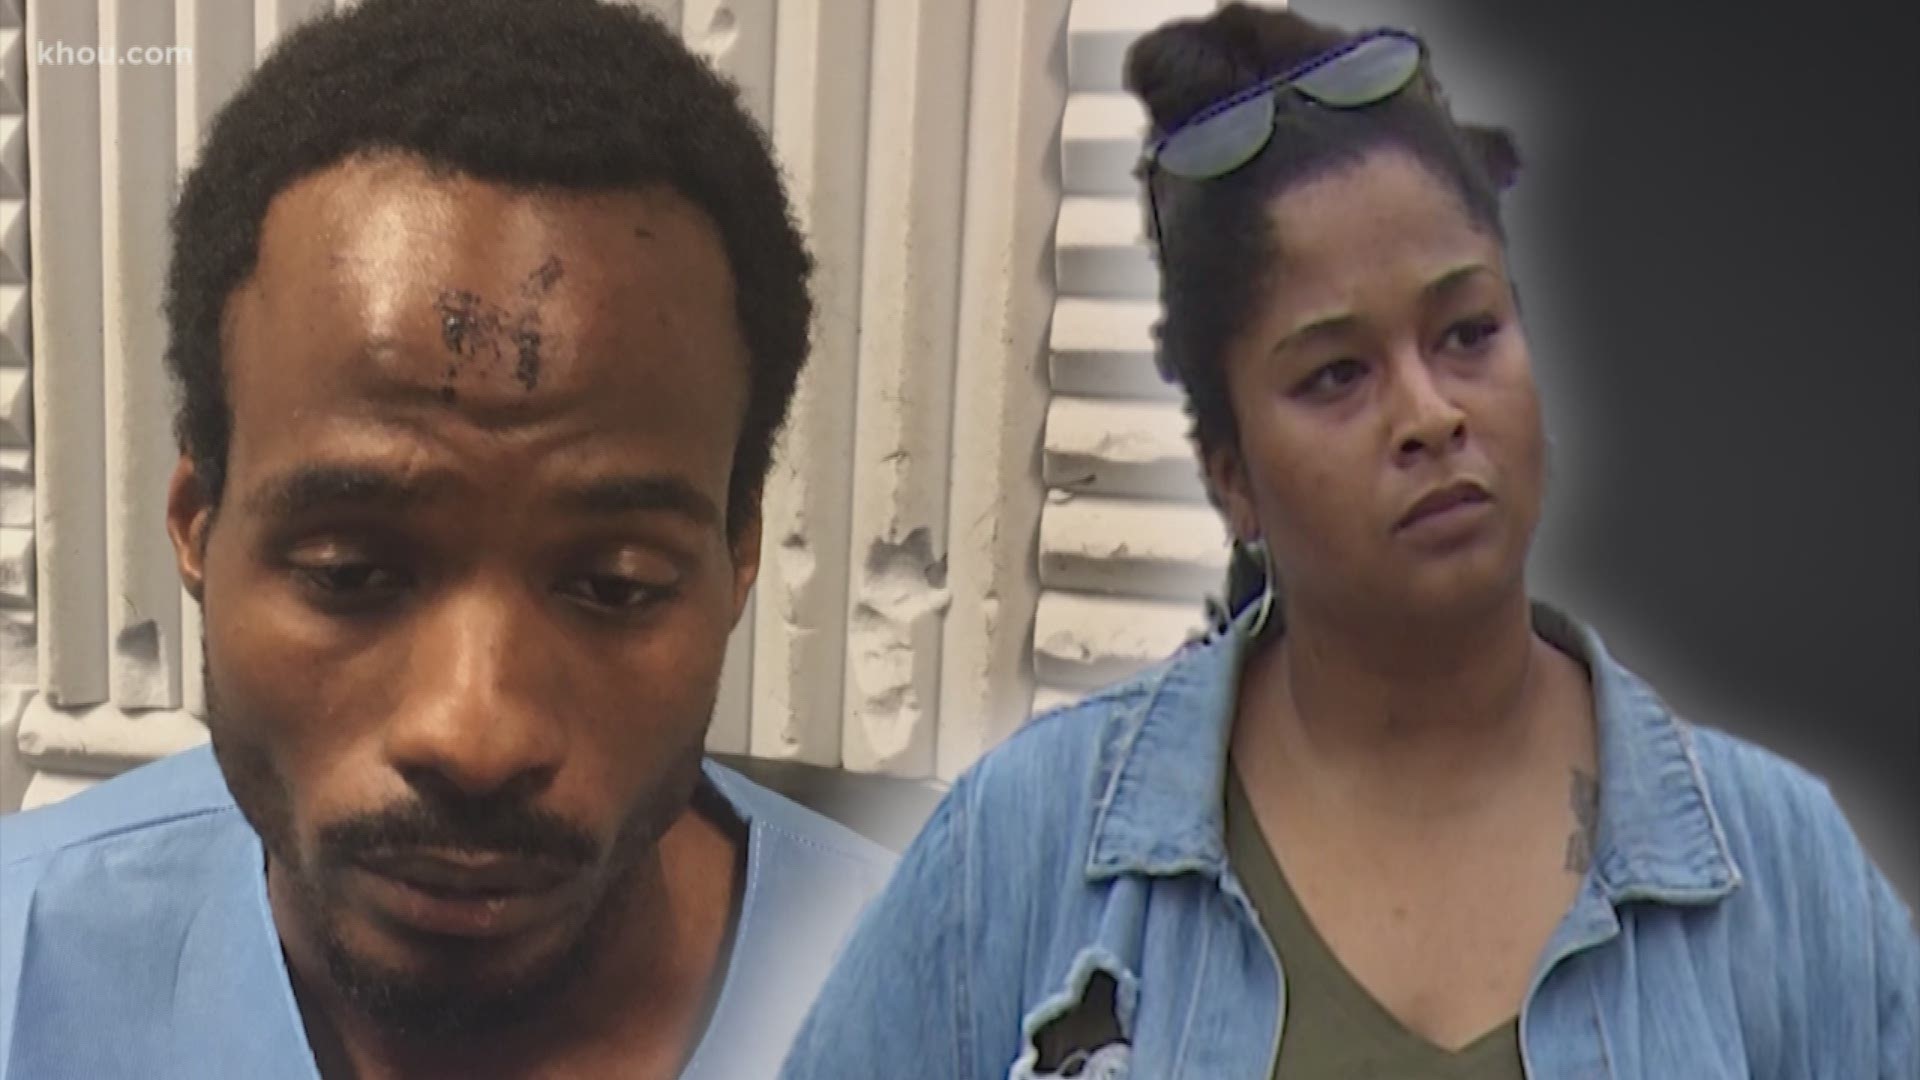 A court order has been issued that bans Maleah Davis’s mother and stepfather from having any contact with the couple's son or any of the mother's other children, KHOU 11 Investigates has learned.  During an emergency hearing Wednesday morning, the court ordered Maleah’s younger half-brother to stay with his paternal grandmother. Maleah’s older brother in now in the custody of his paternal aunt, and if Maleah is found alive, that’s where she would go.